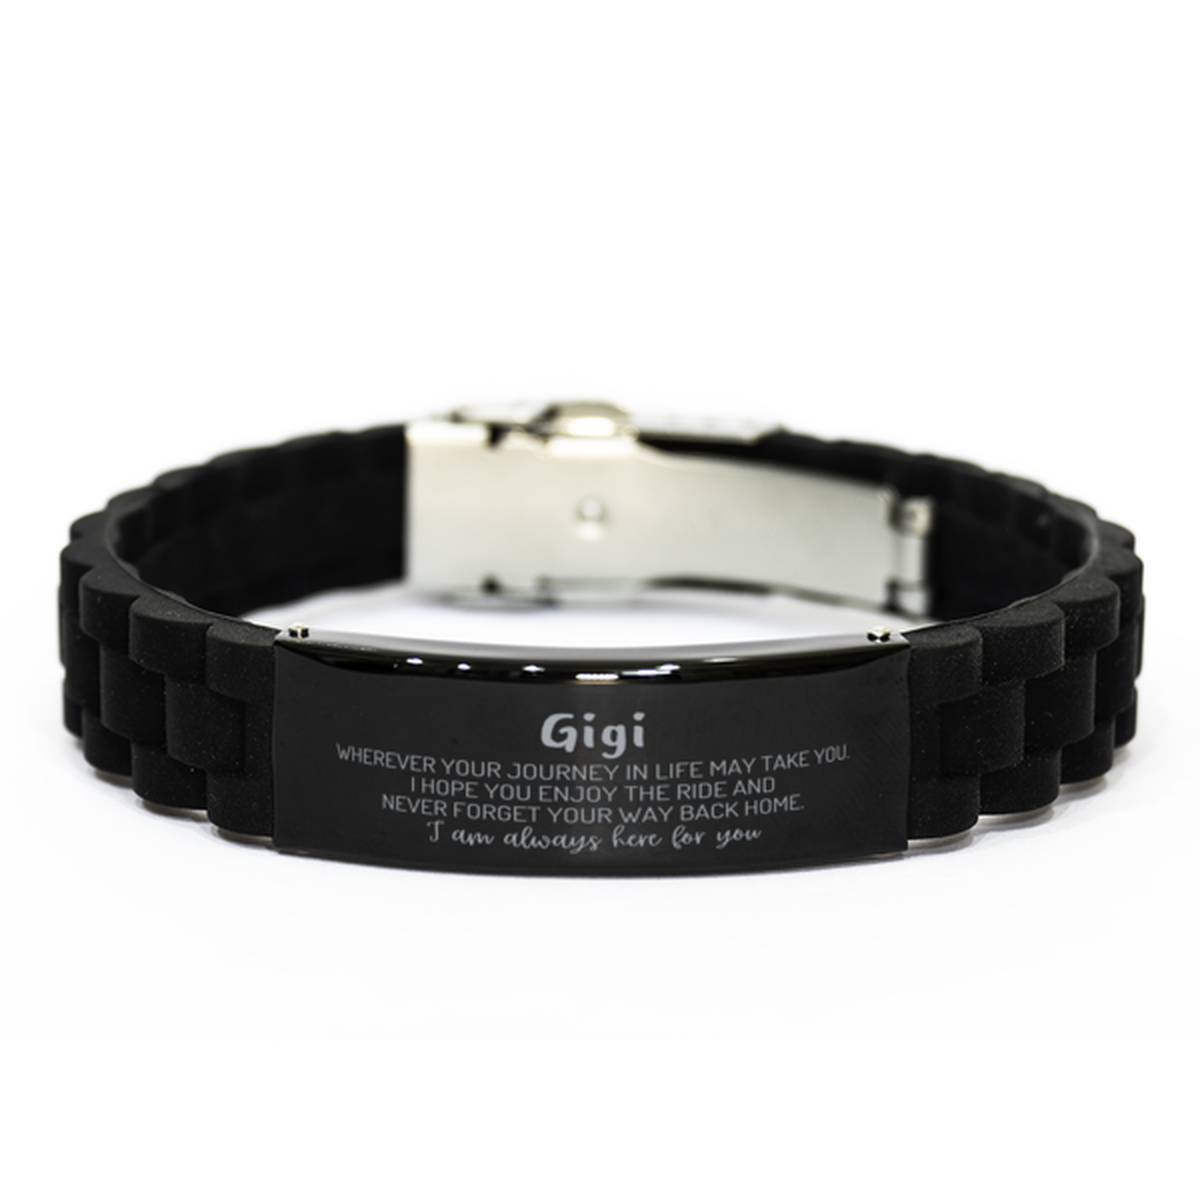 Gigi wherever your journey in life may take you, I am always here for you Gigi Black Glidelock Clasp Bracelet, Awesome Christmas Gifts For Gigi, Gigi Birthday Gifts for Men Women Family Loved One